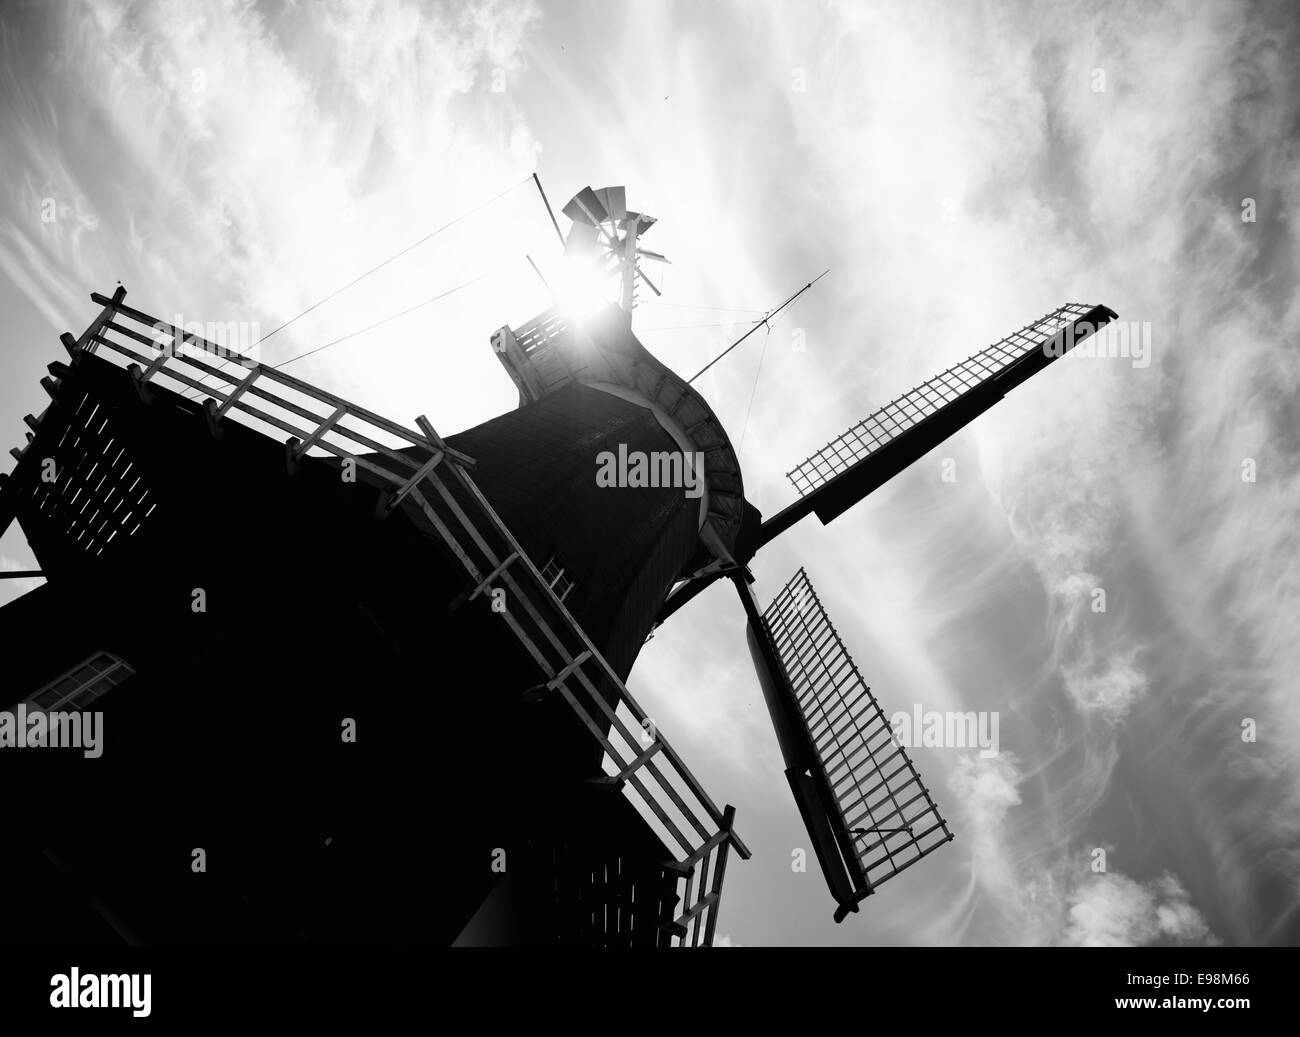 Monochrome image of a tilted windmill with it sails and balcony silhouetted against a cloudy sky by a sun flare over the roof. Stock Photo